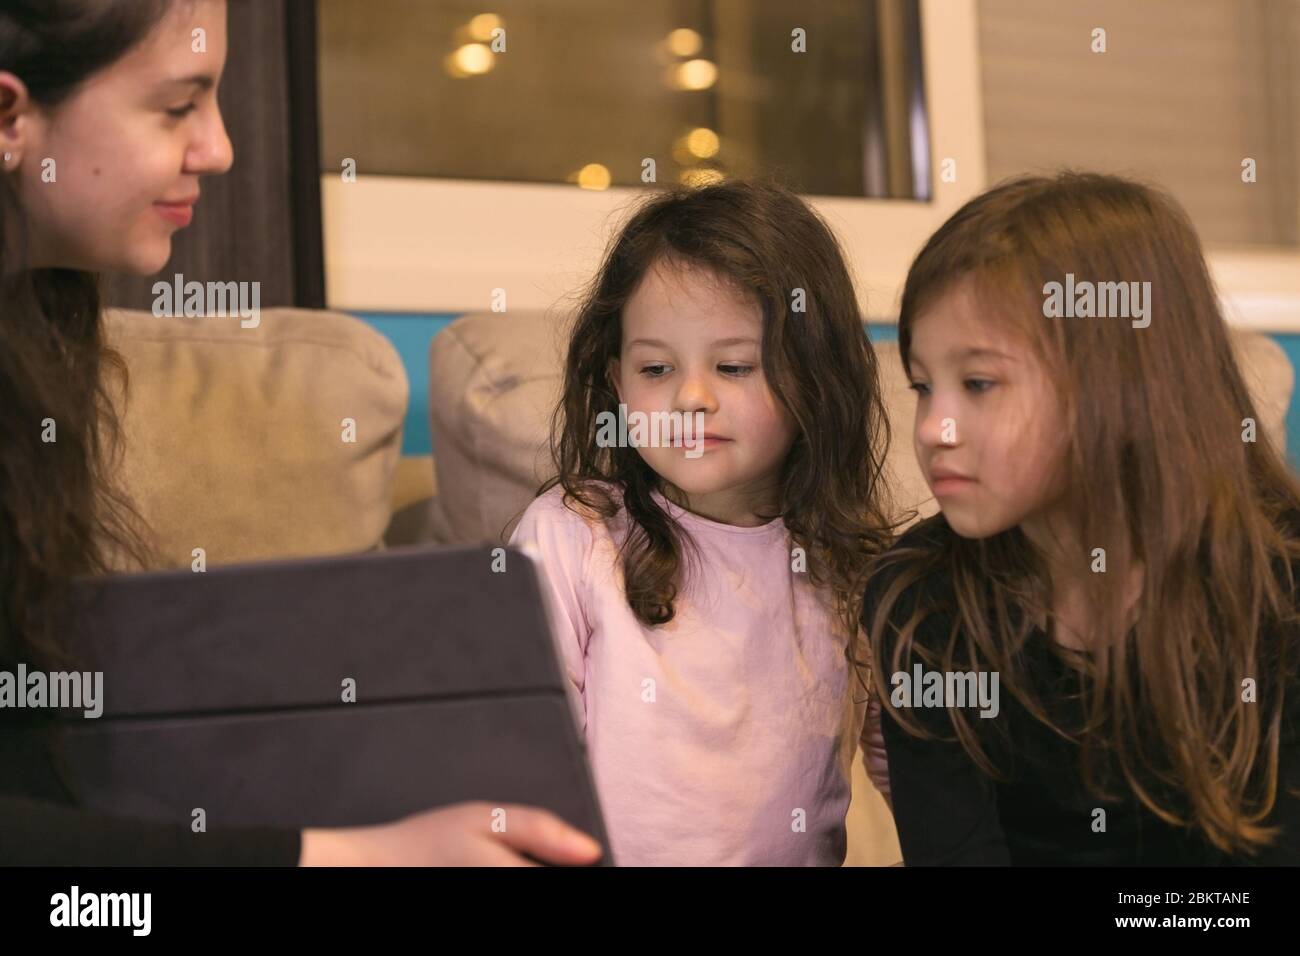 Young Mother teaching children at home on Electronic Device Stock Photo